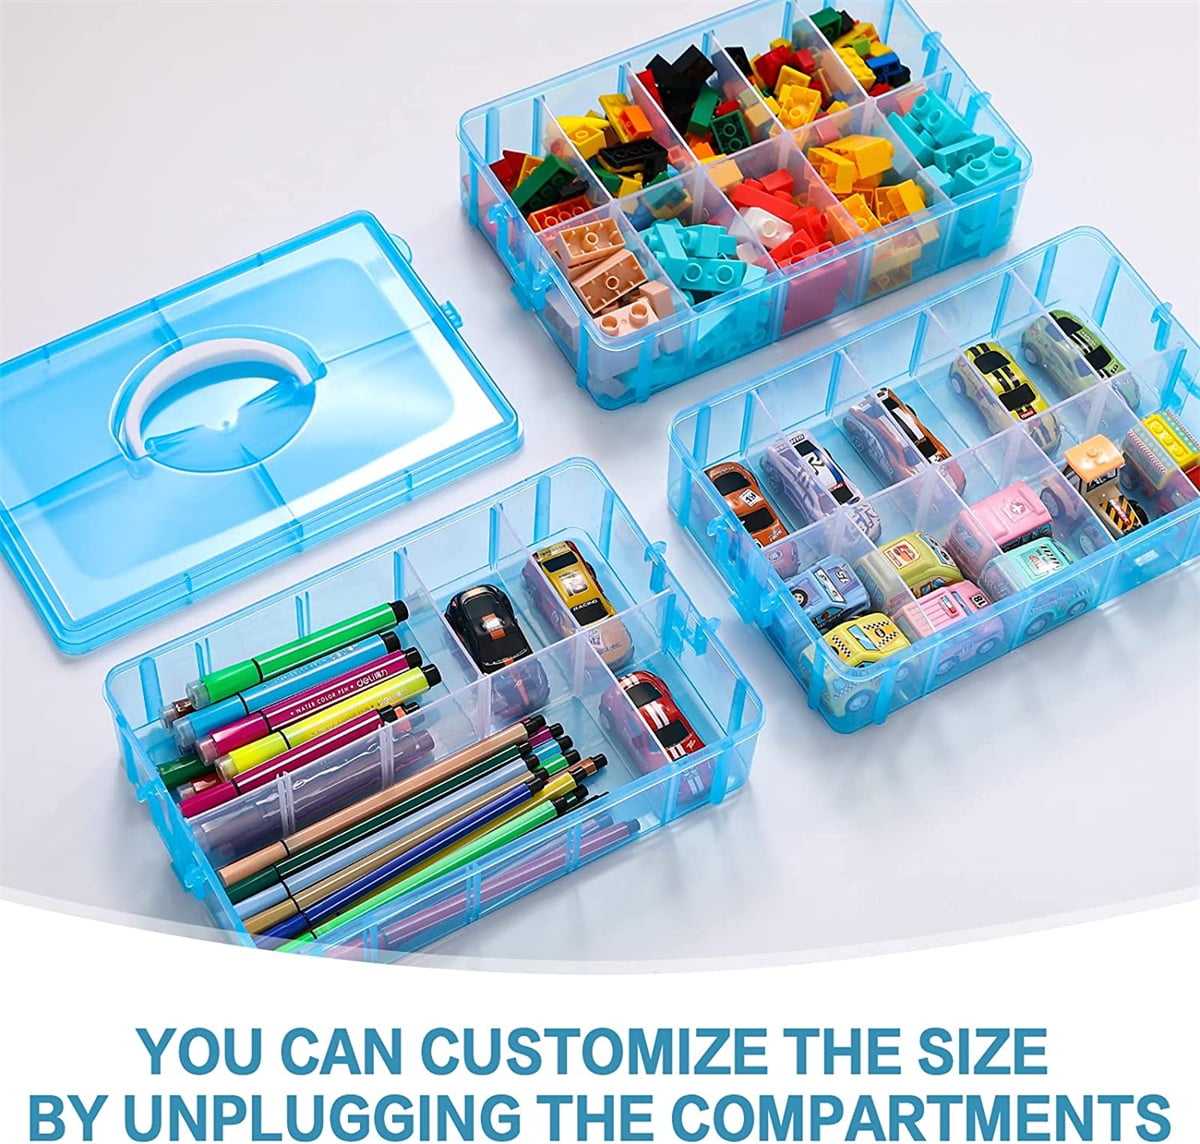 Casewin 3 Layer Stack & Carry Box, Plastic Multipurpose Portable Storage  Container Box Handled Organizer Storage Box for Organizing Stationery,  Sewing, Art Craft, Jewelry and Beauty Supplies Blue 